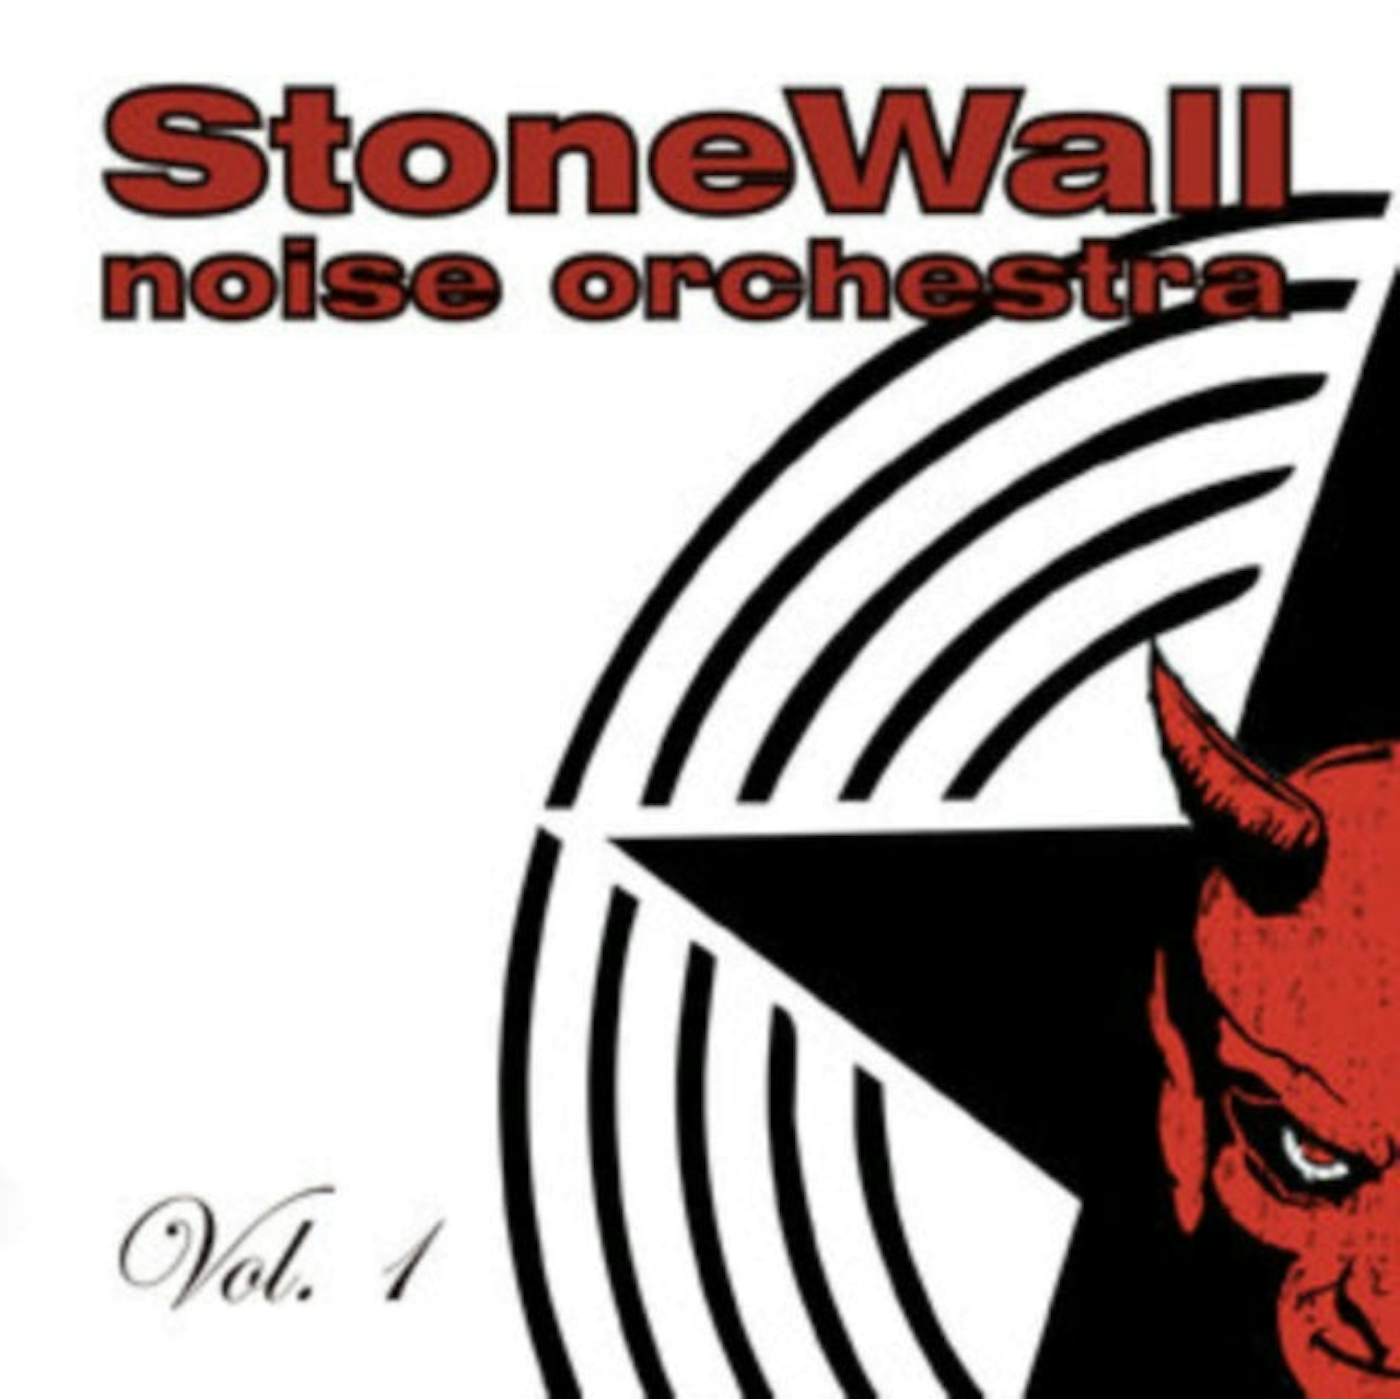 Stonewall Noise Orchestra CD - Vol. 1